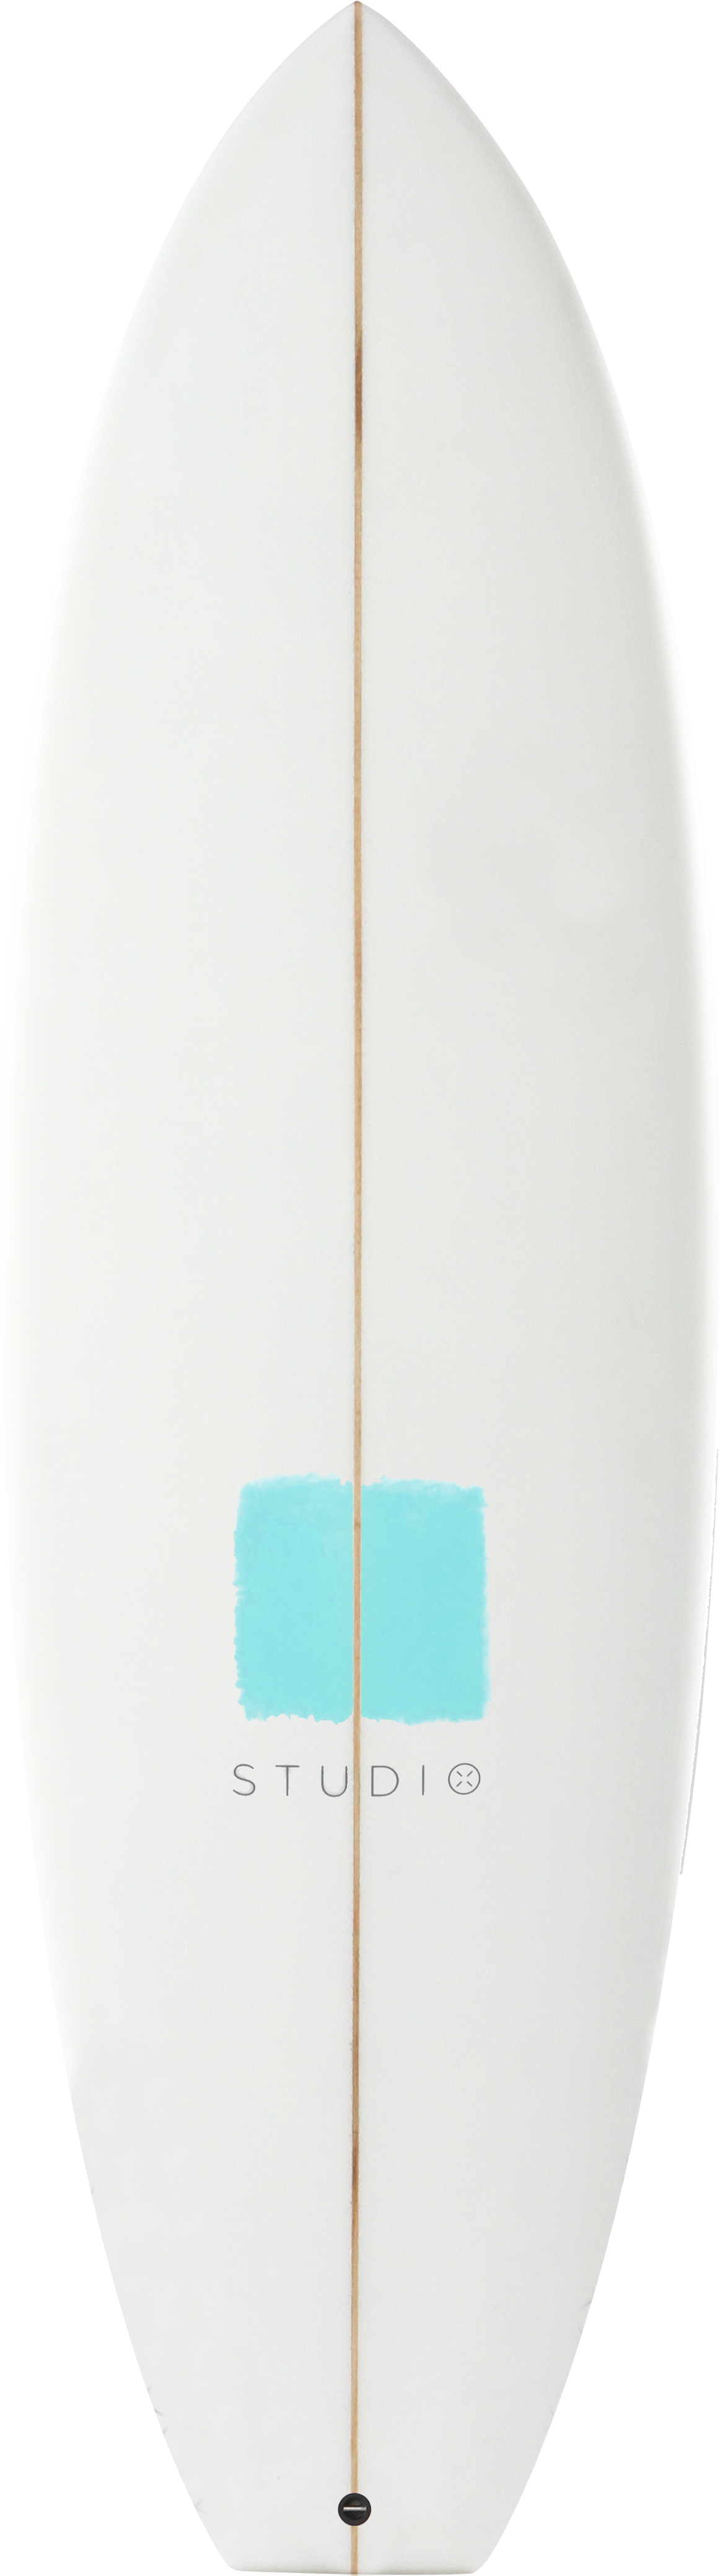 Decoration Surfboard - Zoom - 5-4 White/Teal